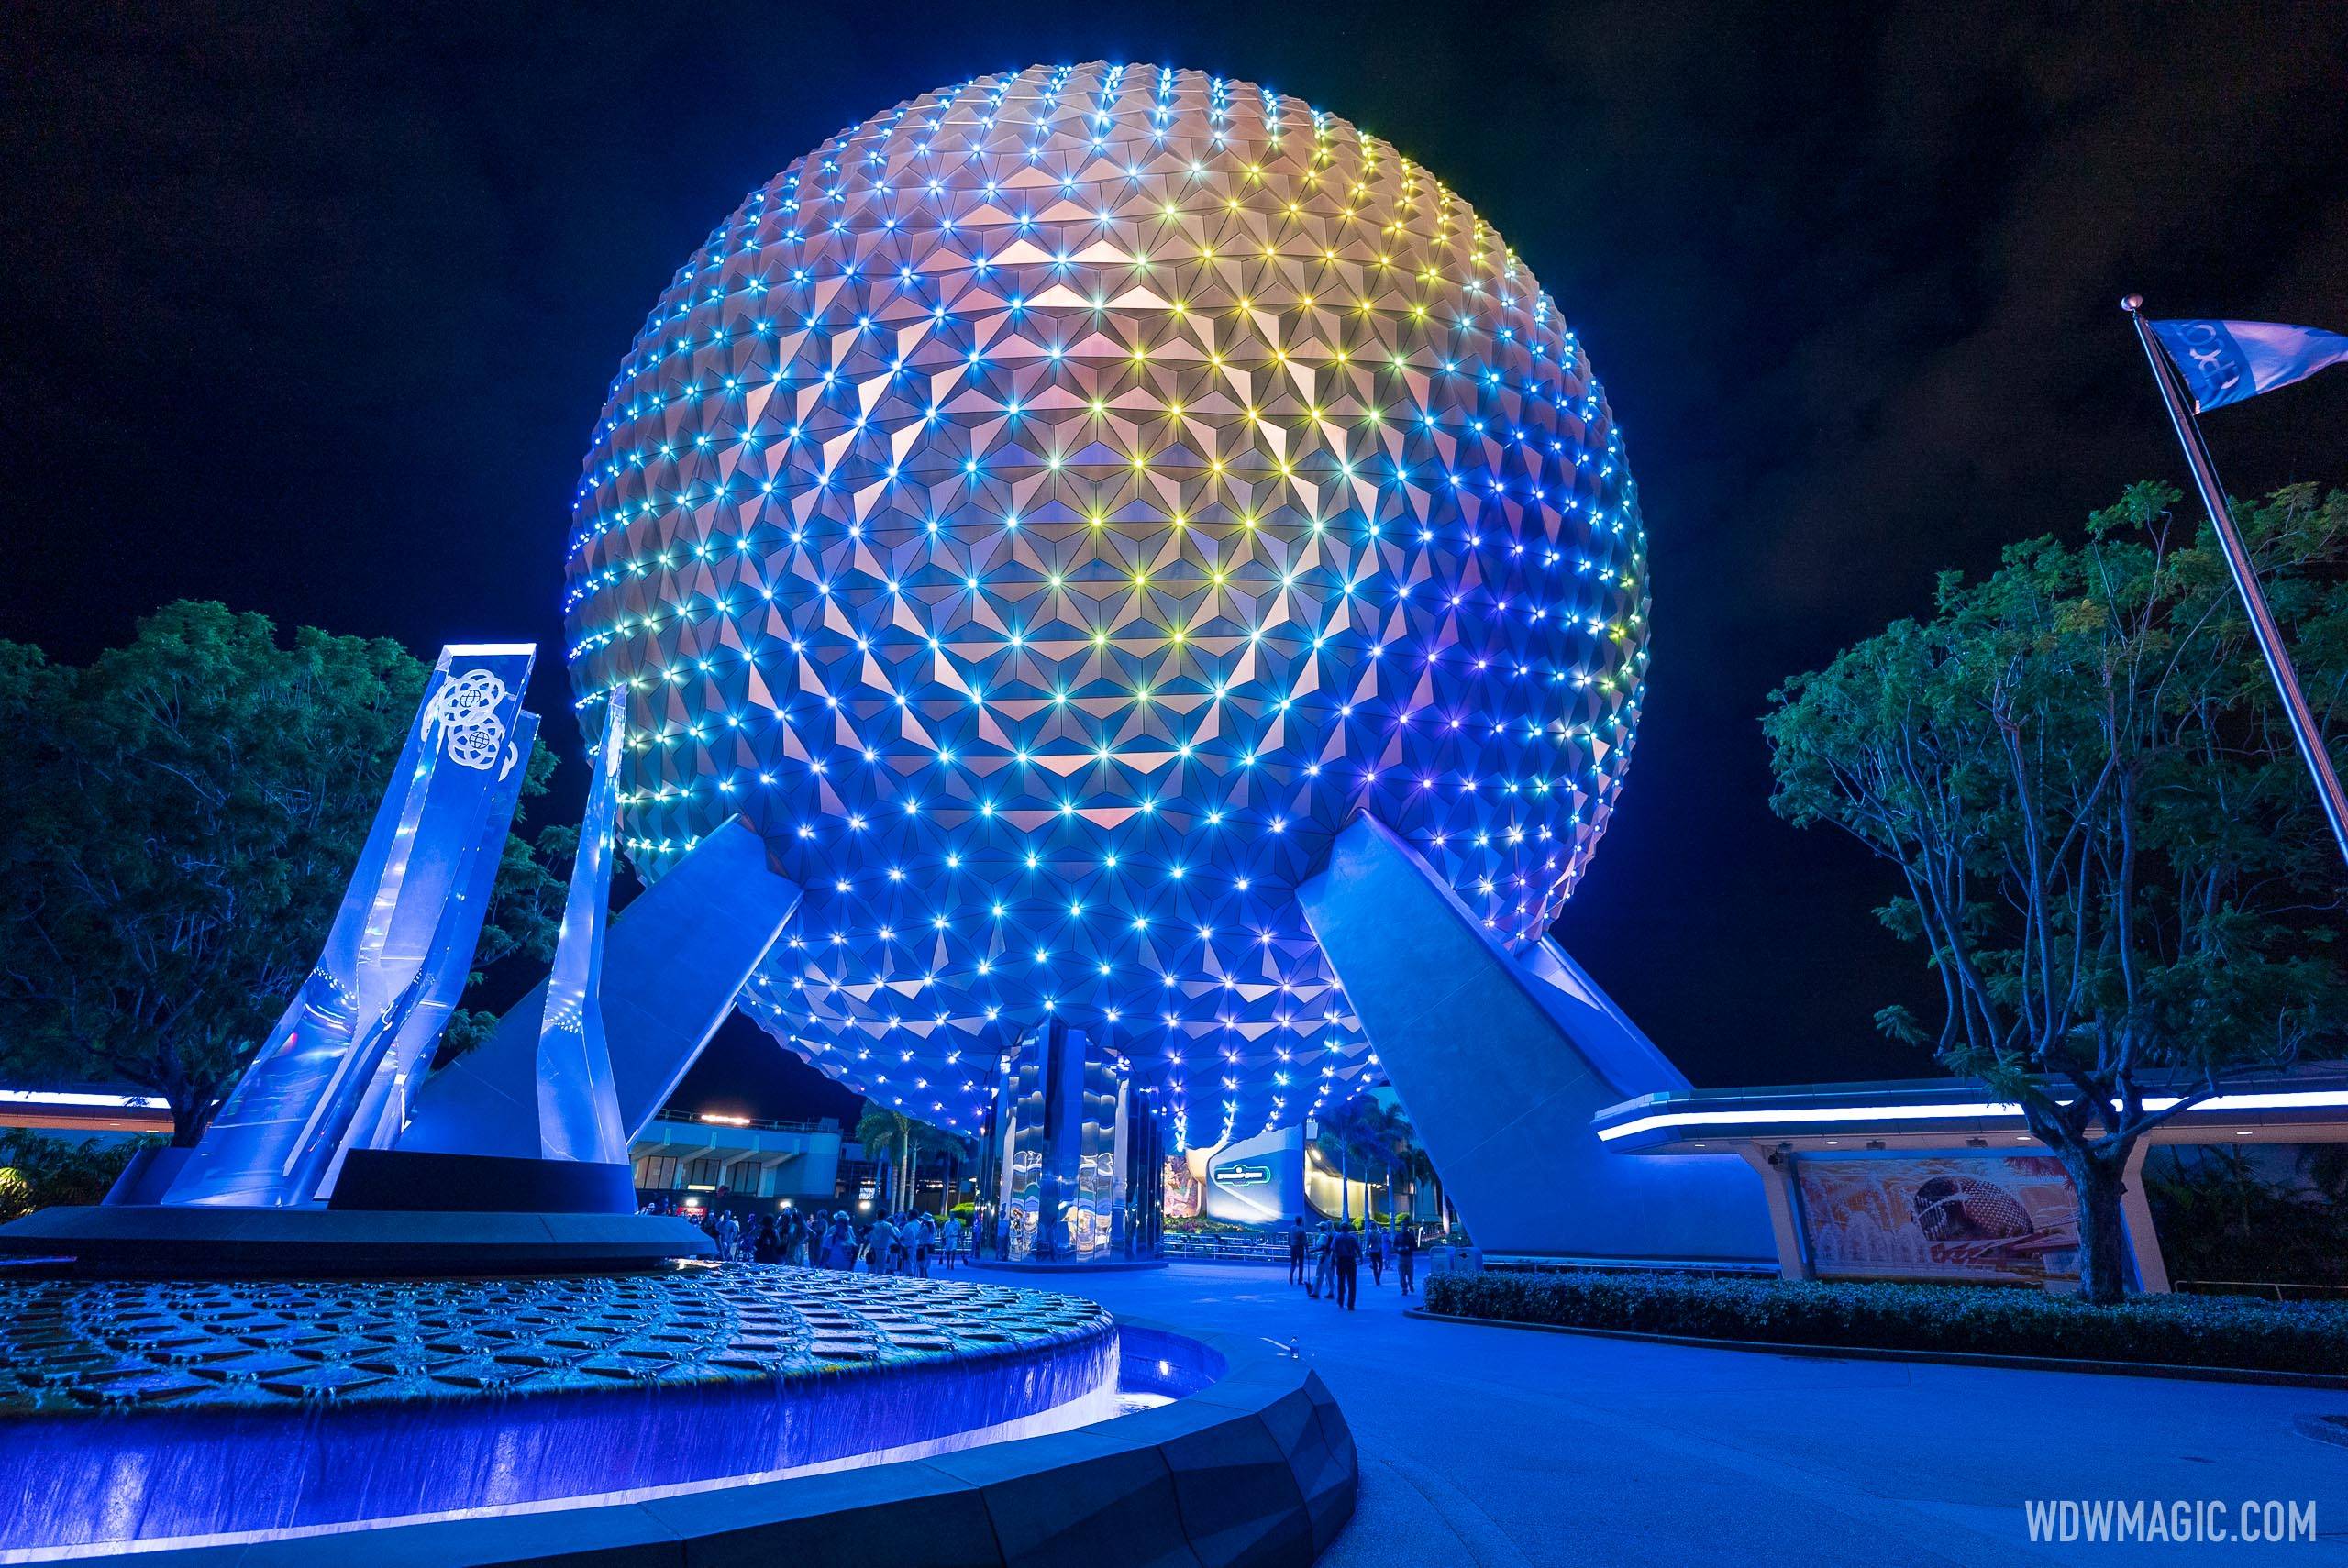 Spaceship Earth new lighting design with points of light - Photo 8 of 13